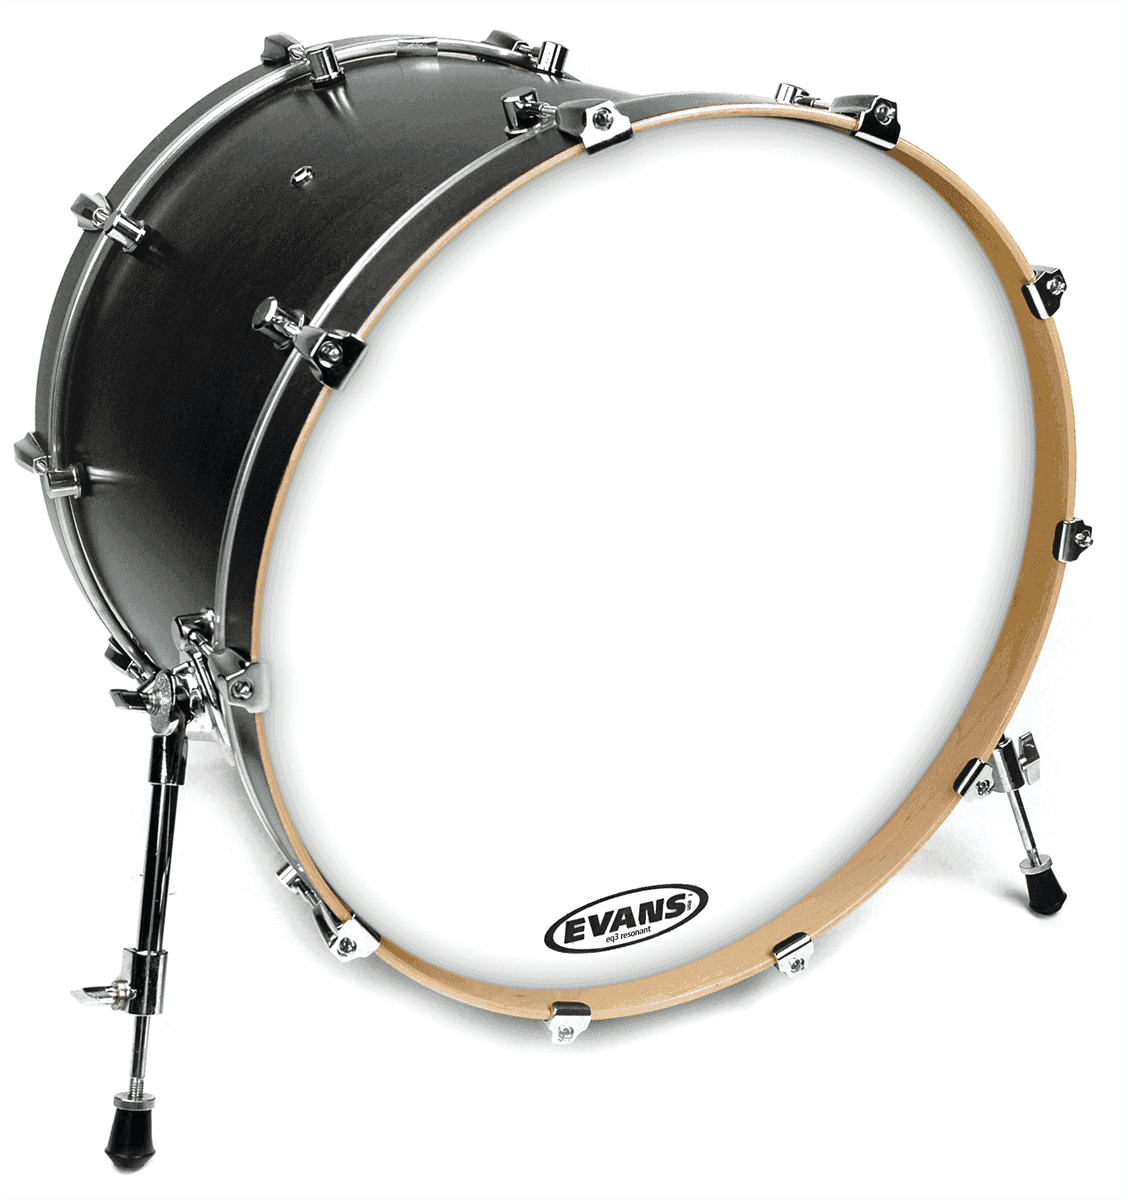 Evans Eq3 Resonant No Port Smooth White Bass Drumhead, Bass Hoop - 16 Pouces - Peau Grosse Caisse - Variation 2